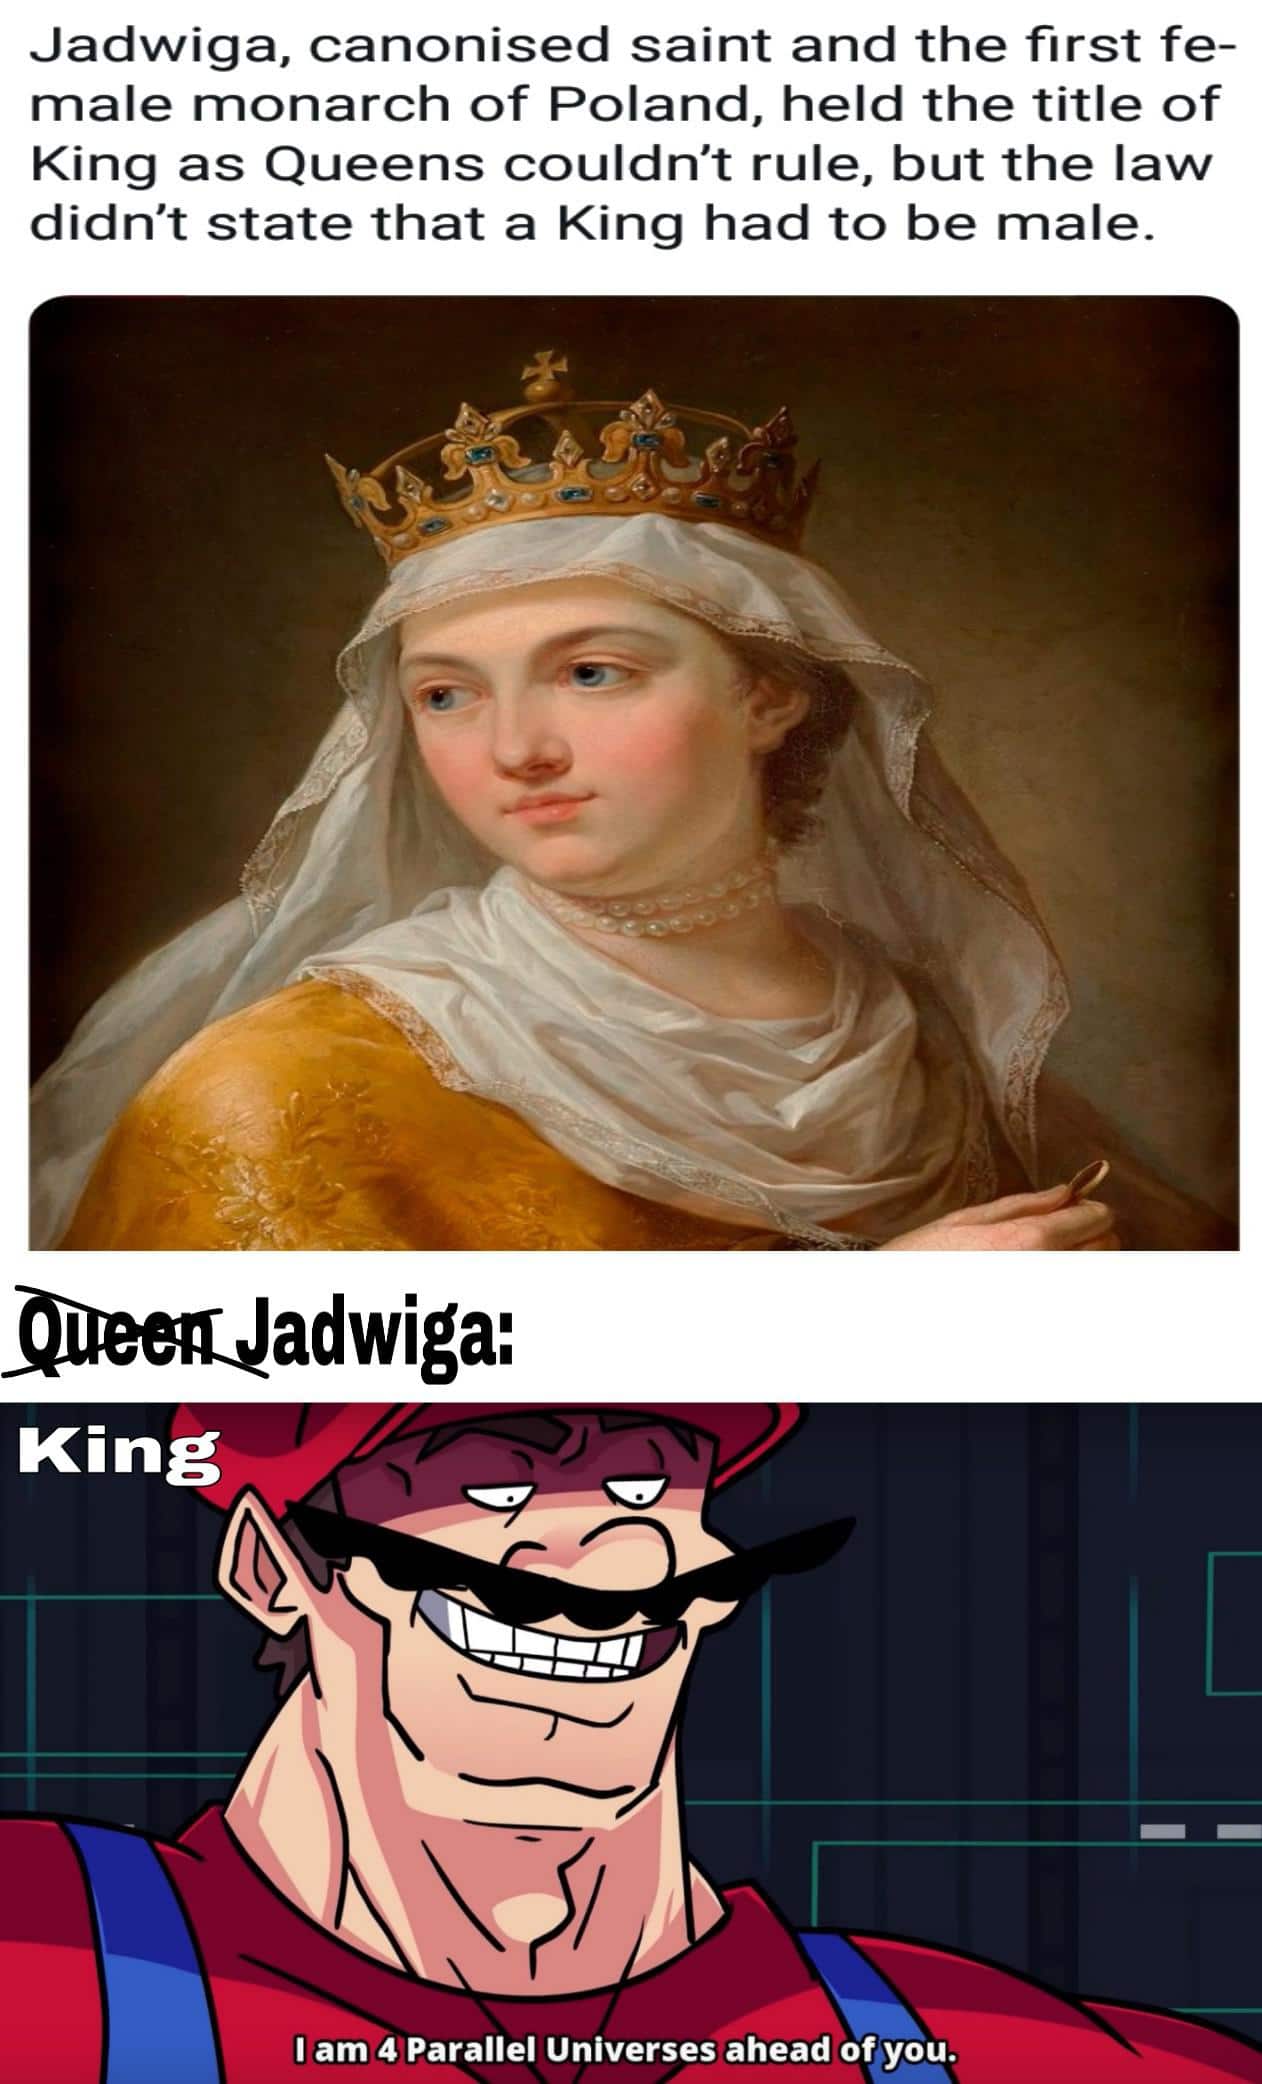 History, Poland, King, Jadwiga, Hungary, Civ History Memes History, Poland, King, Jadwiga, Hungary, Civ text: Jadwiga, canonised saint and the first fe- male monarch of Poland, held the title of King as Queens couldn't rule, but the law didn't state that a King had to be male. King I am 4 Parallel Universes ahead of you. 